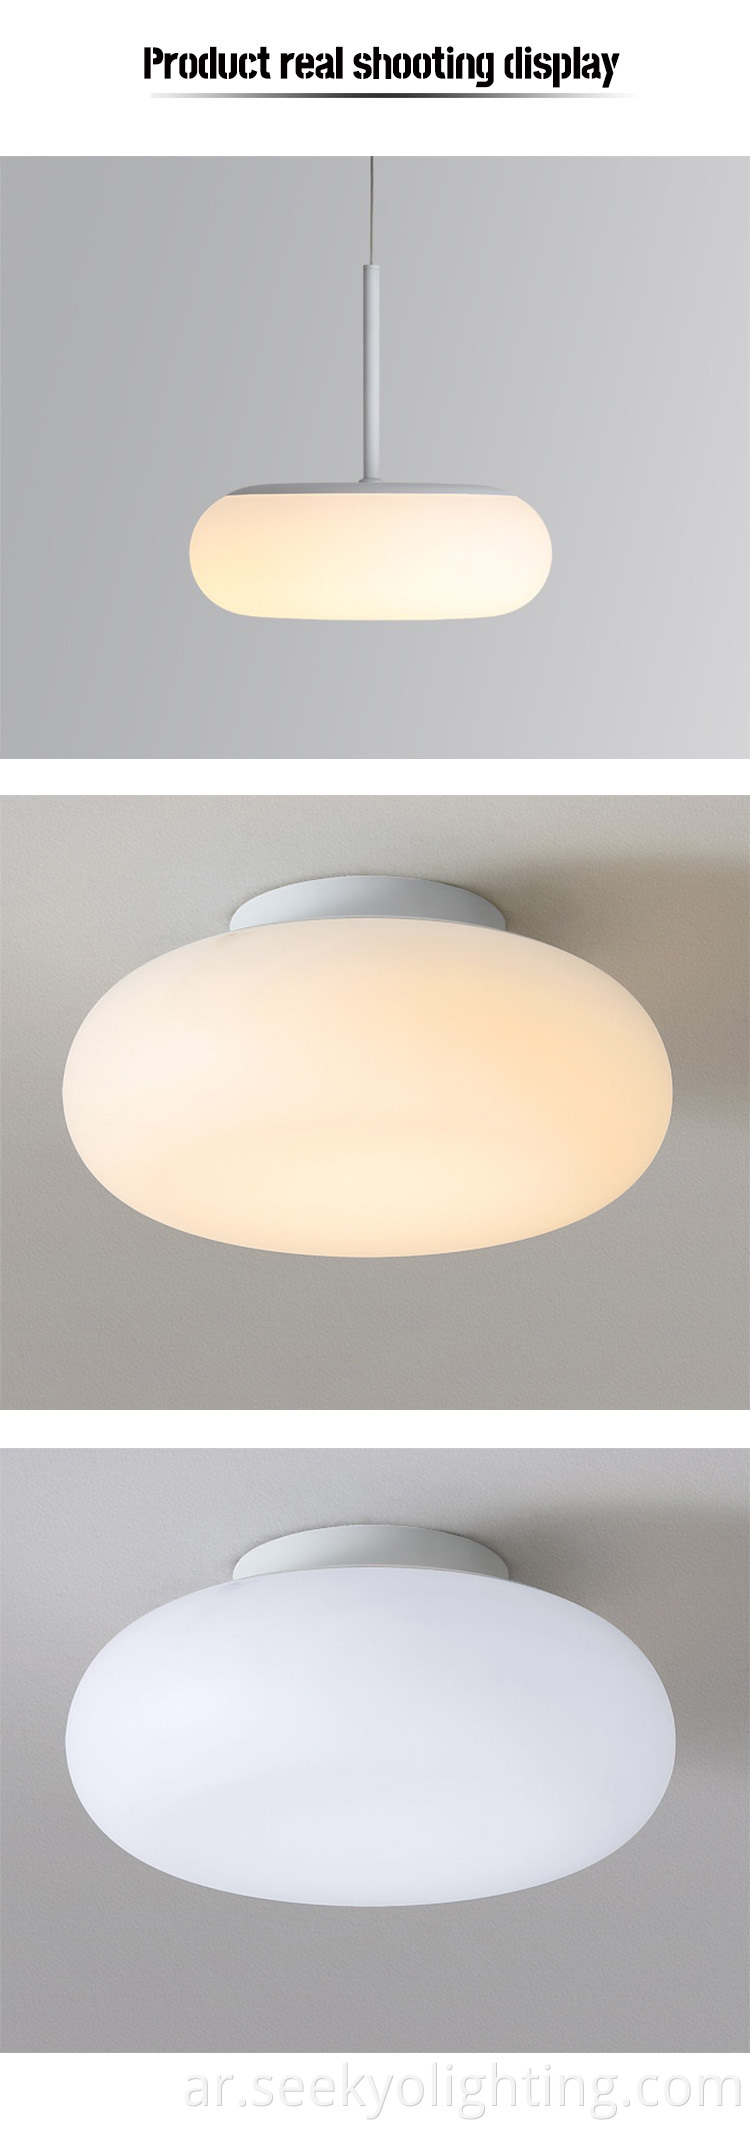 The lamp features a built-in LED light source that produces a soft, warm glow.